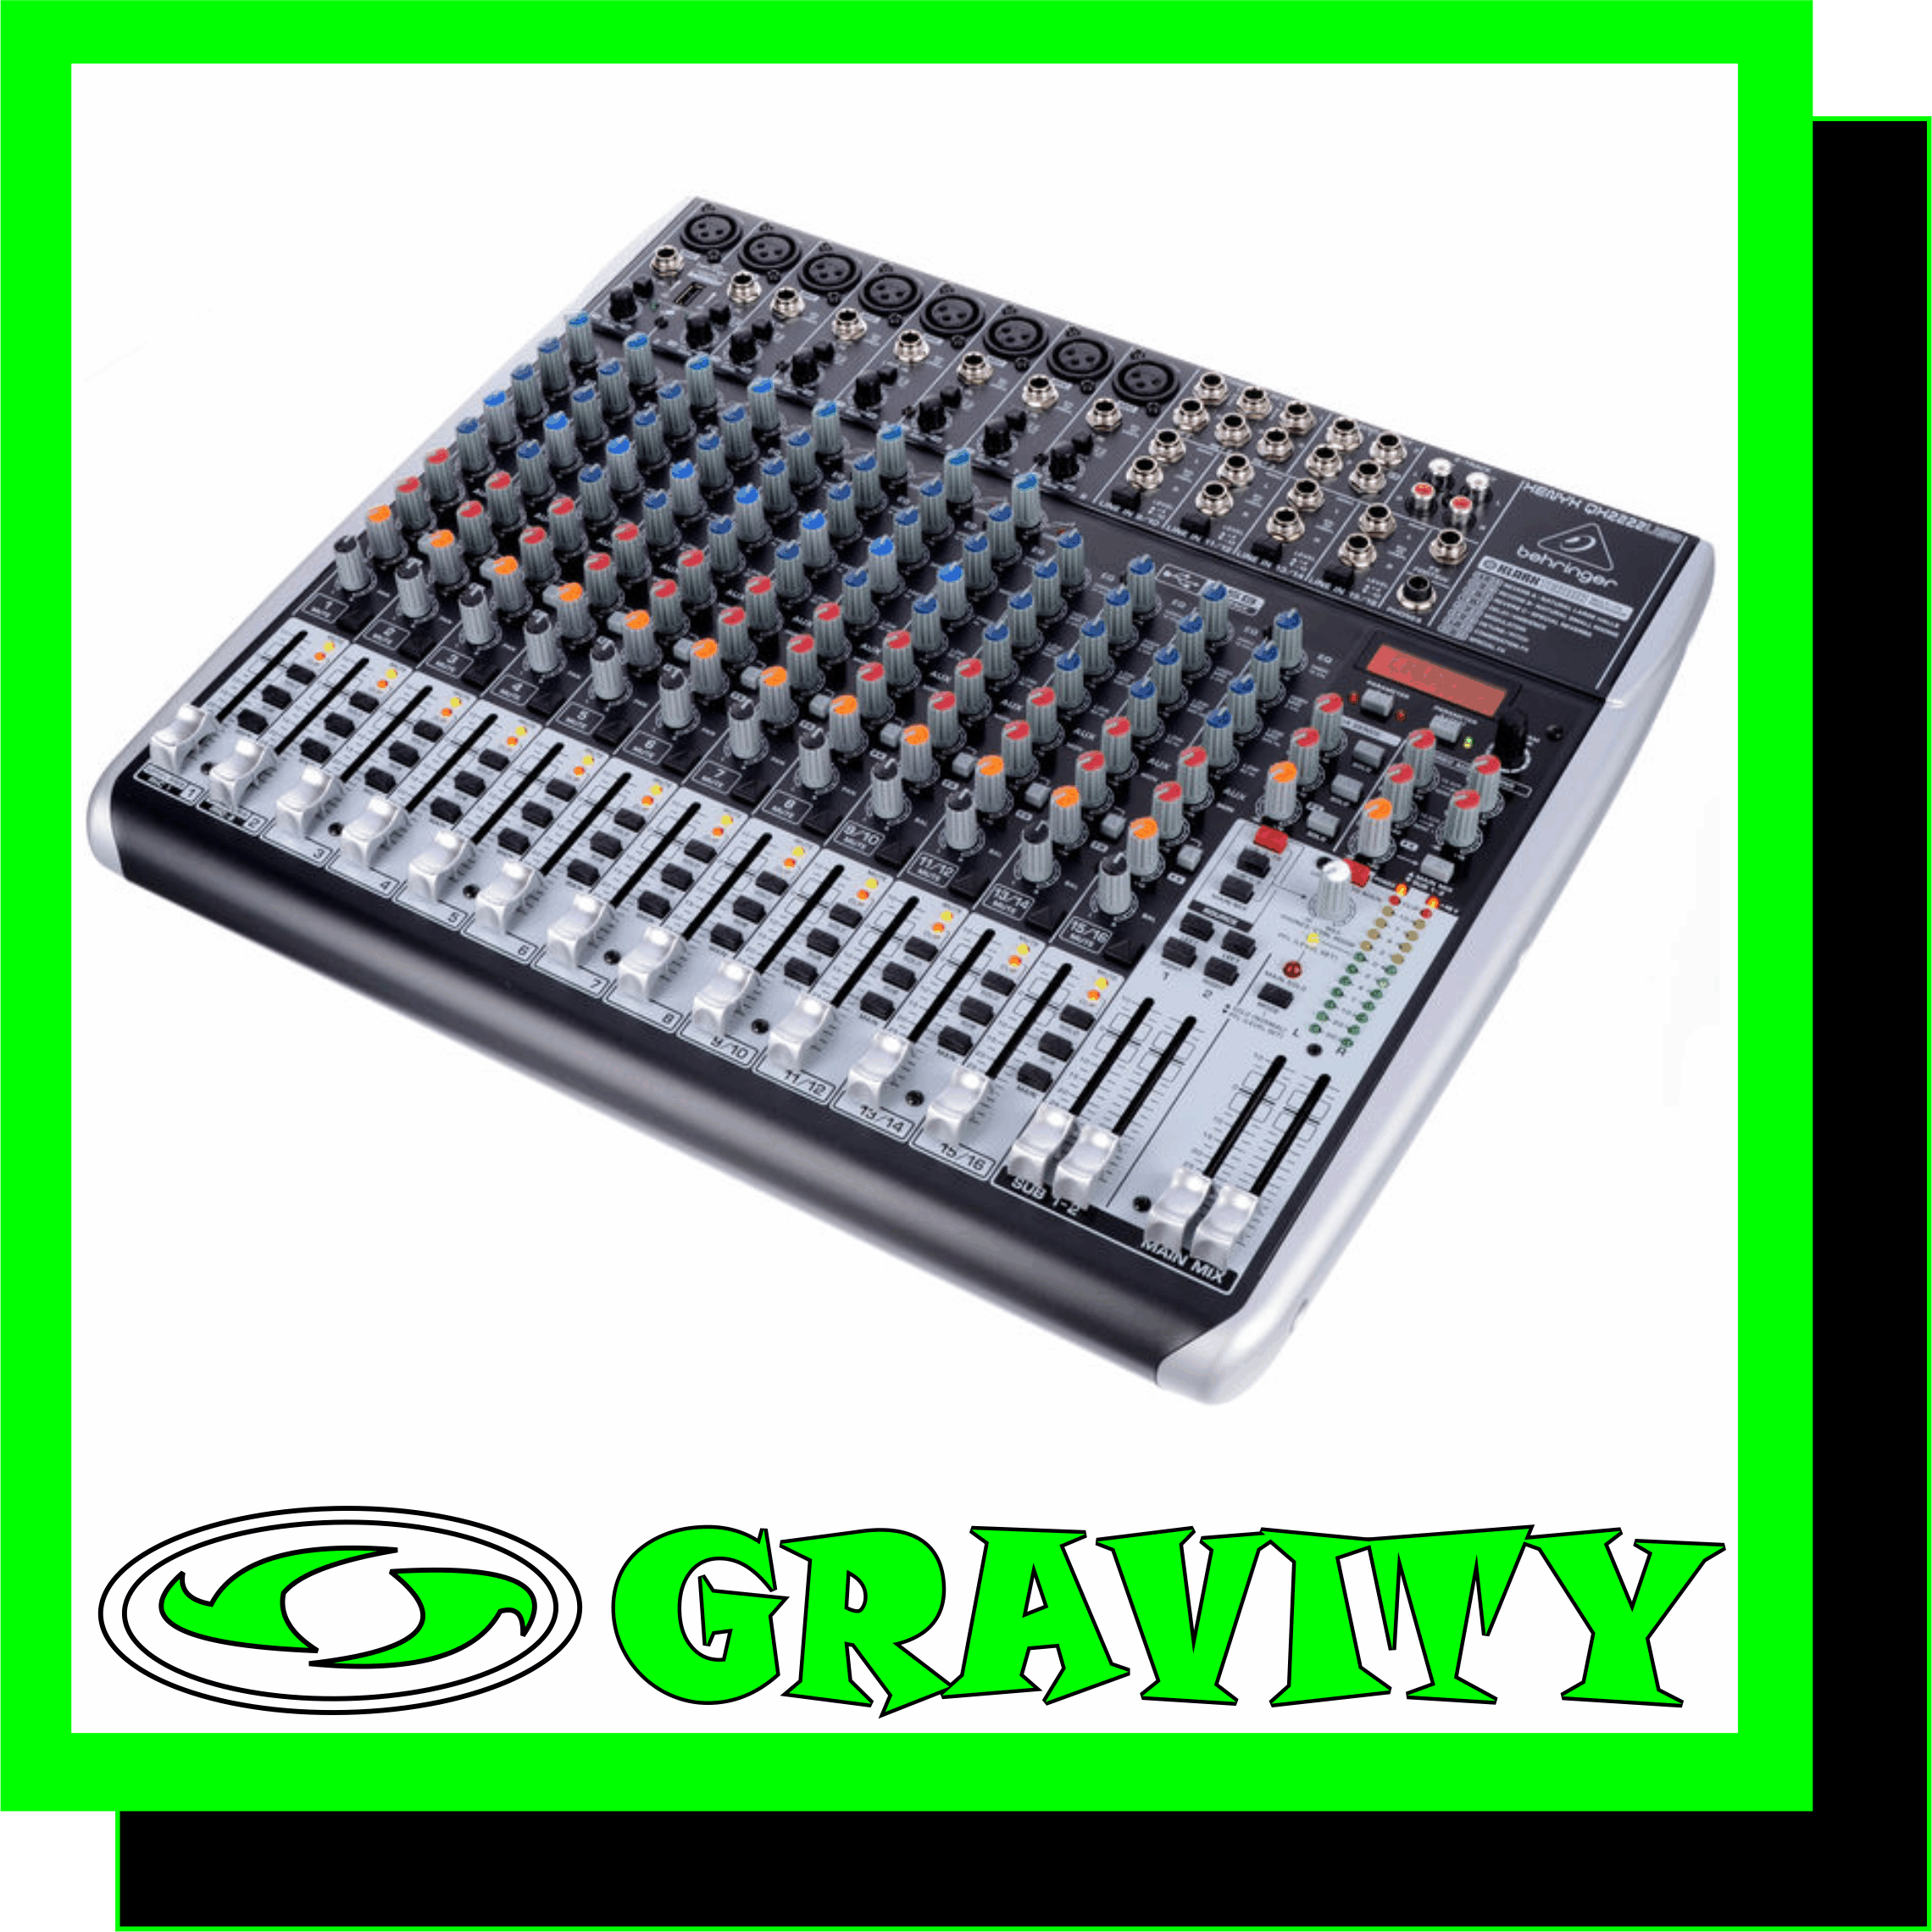 Behringer XENYX QX2222USB Premium 22-Input 2-2-Bus Mixer  Product Features: -Premium ultra-low noise, high headroom mixer -8 state-of-the-art, phantom-powered XENYX Mic Preamps comparable to stand-alone boutique preamps -8 studio-grade compressors with super-easy “one-knob” functionality and control LED for professional vocal and instrumental sound -Ultra-high quality KLARK TEKNIK FX processor with LCD display, dual-parameters, Tap function and storable user parameter settings -“Wireless-ready” for high-quality BEHRINGER digital wireless system (not included) -Built-in stereo USB/Audio Interface to connect directly to your computer. Free audio recording, editing and podcasting software plus 150 instrument/effect plug-ins  downloadable at behringer.com -Neo-classic “British” 3-band EQs with semi-parametric mid band for warm and musical sound -Channel inserts on each mono channel for flexible connection of outboard equipment -3 aux sends per channel: 1 pre fader for monitoring, 1 pre/post fader switchable for monitoring/FX applications, 1 post fader (for internal FX or as external send) -Clip LEDs, mute, main mix and subgroup routing switches, solo and PFL functions on all channels -2 subgroups with separate outputs for added routing flexibility; 3 multi-functional stereo aux returns with flexible routing -Balanced main mix outputs with ¼” jack and gold-plated XLR connectors, separate control room, headphones and stereo rec outputs -Control room/phones outputs with multi-input source matrix; rec inputs assignable to main mix or control room/phones outputs -Long-wearing 60-mm logarithmic-taper faders and sealed rotary controls -“Planet Earth” switching power supply for maximum flexibility (100 – 240 V~), noise-free audio, superior transient response plus low power consumption for energy saving -High-quality components and exceptionally rugged construction ensure long life -Conceived and designed by BEHRINGER Germany  The feature-packed XENYX QX2222USB mixer allows you to effortlessly achieve premium-quality sound thanks to its 8 onboard studio- grade XENYX Mic Preamps and ultra- musical 'British' channel EQs with a semi-parametric mid band for warm and musical sound. And our easy-to-use 'one-knob' compressors provide total dynamic control for the ultimate in punch and clarity, while respecting all the power and emotion you pack into every note. Add to this our KLARK TEKNIK FX processor with 32 studio-grade presets with dual addressable parameters, Tap function and storable user parameter settings and the QX2222USB becomes an incredibly versatile mixer for your live performances. But XENYX QX2222USB isnand#8242;t just designed to ha ndle your live gigs; they also provide the state-of-the-art tools you need to make stunning, professional- quality recordings. Along with their built-in USB/audio interfaces, XENYX USB mixers come with all the recording and editing software needed to turn your computer system into a complete, high-performance home recording studio.